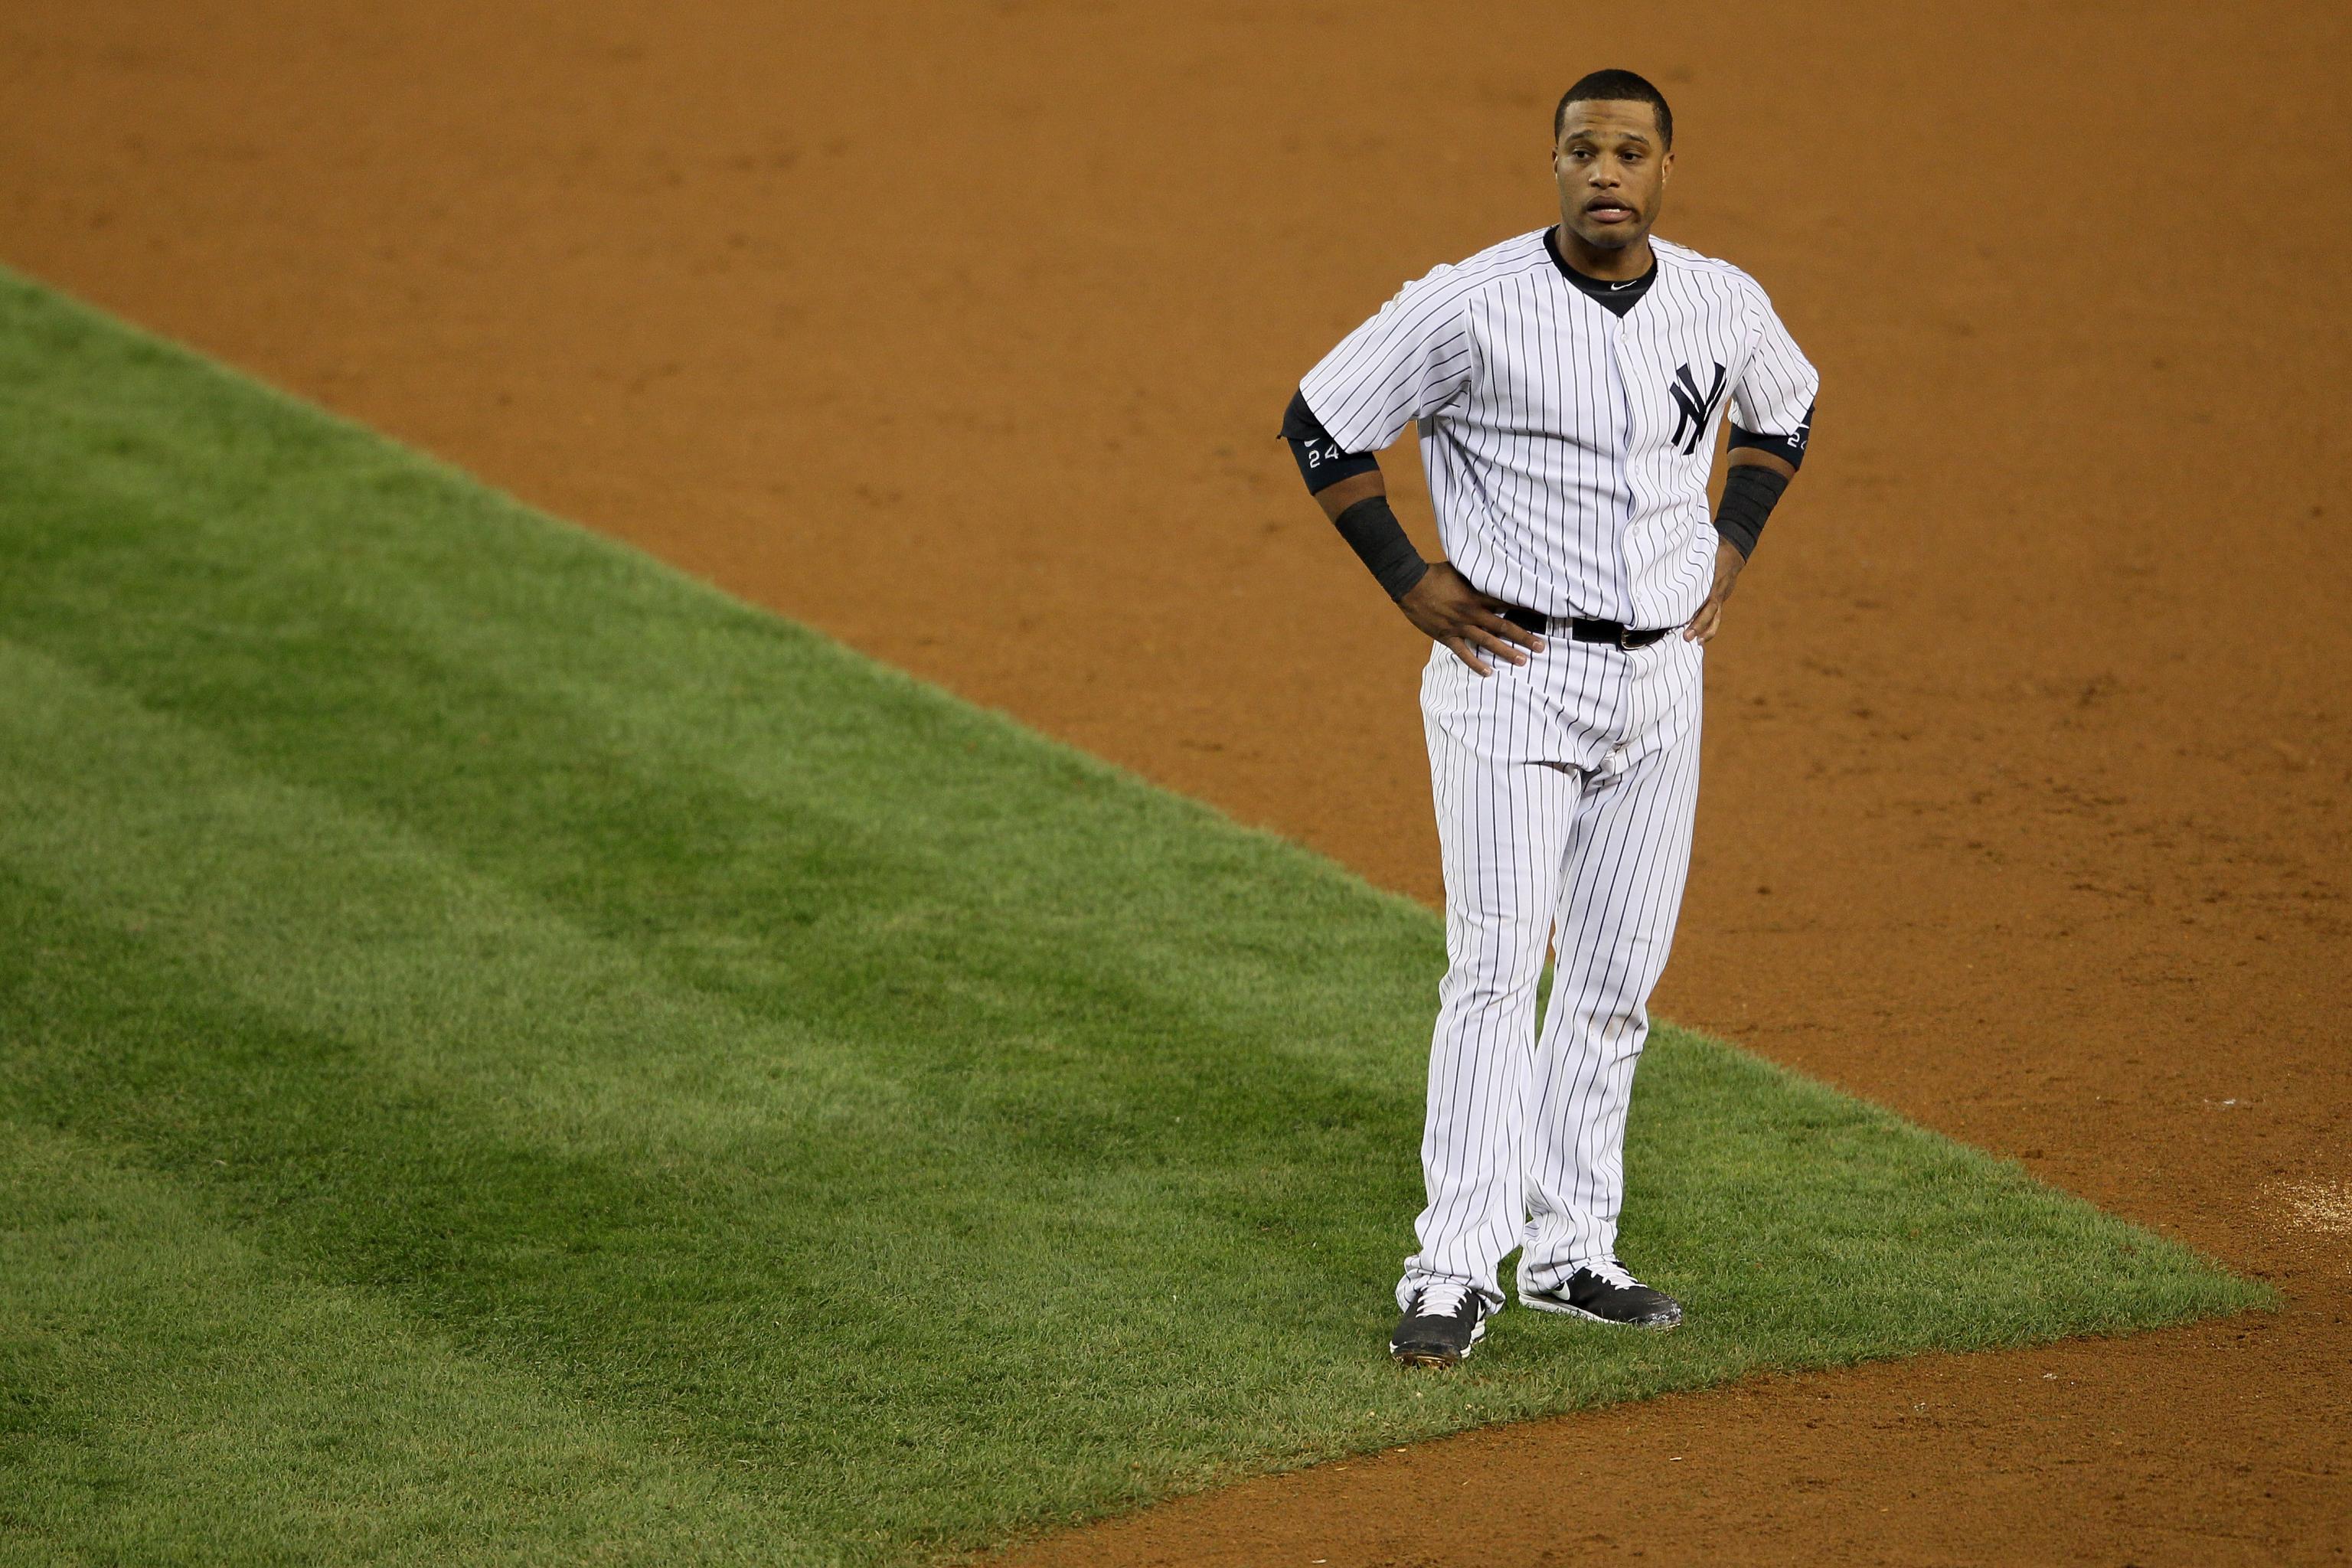 Forget About A-Rod, Let's Talk About Robinson Cano